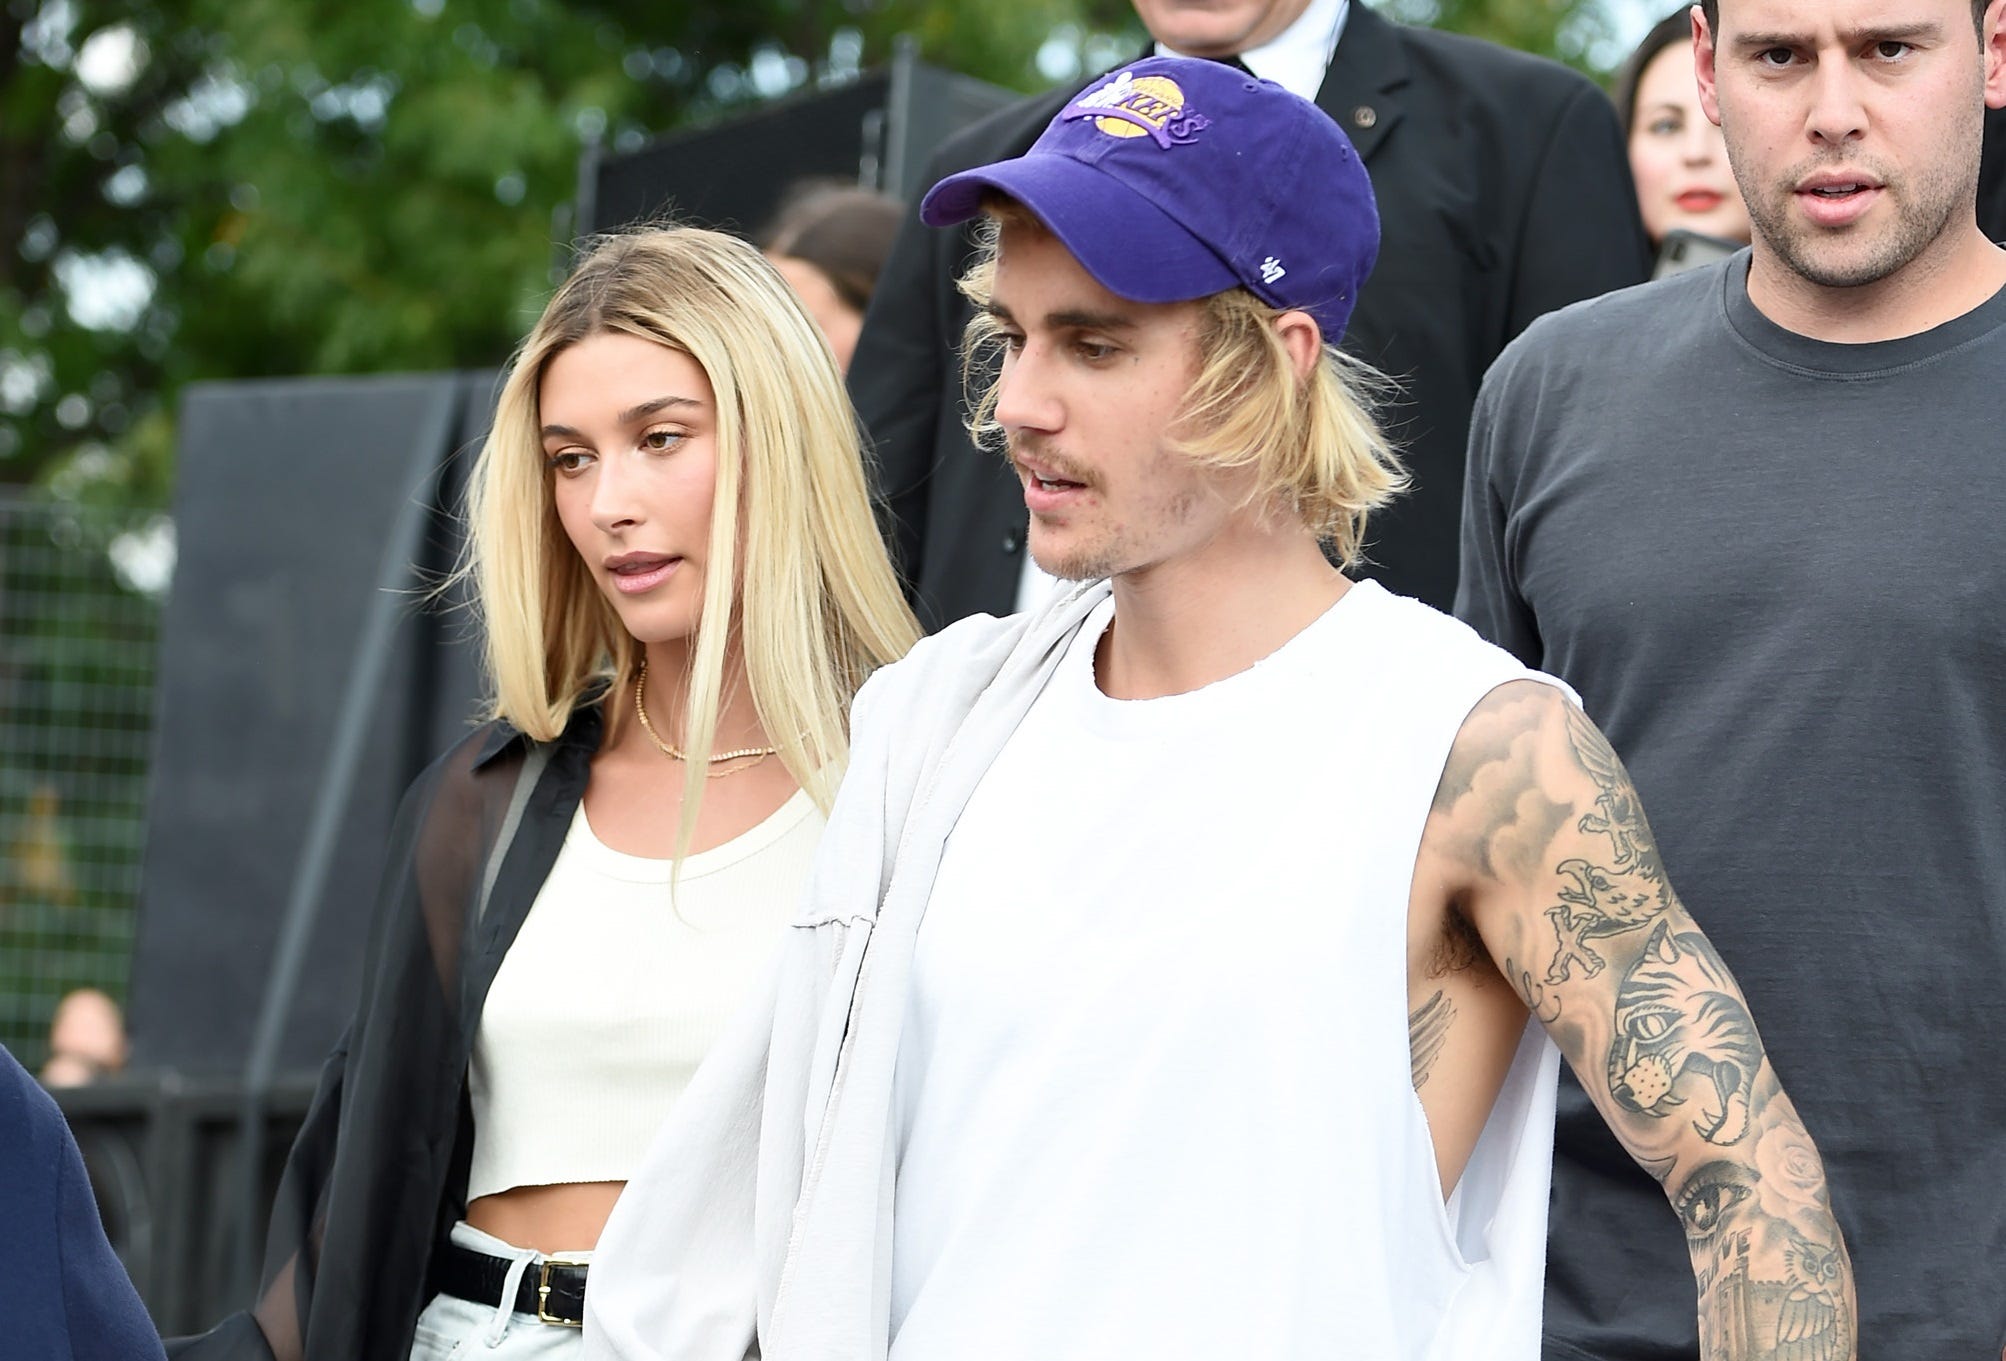 Hailey Baldwin Reveals She Wants To Have Kids With Justin Bieber